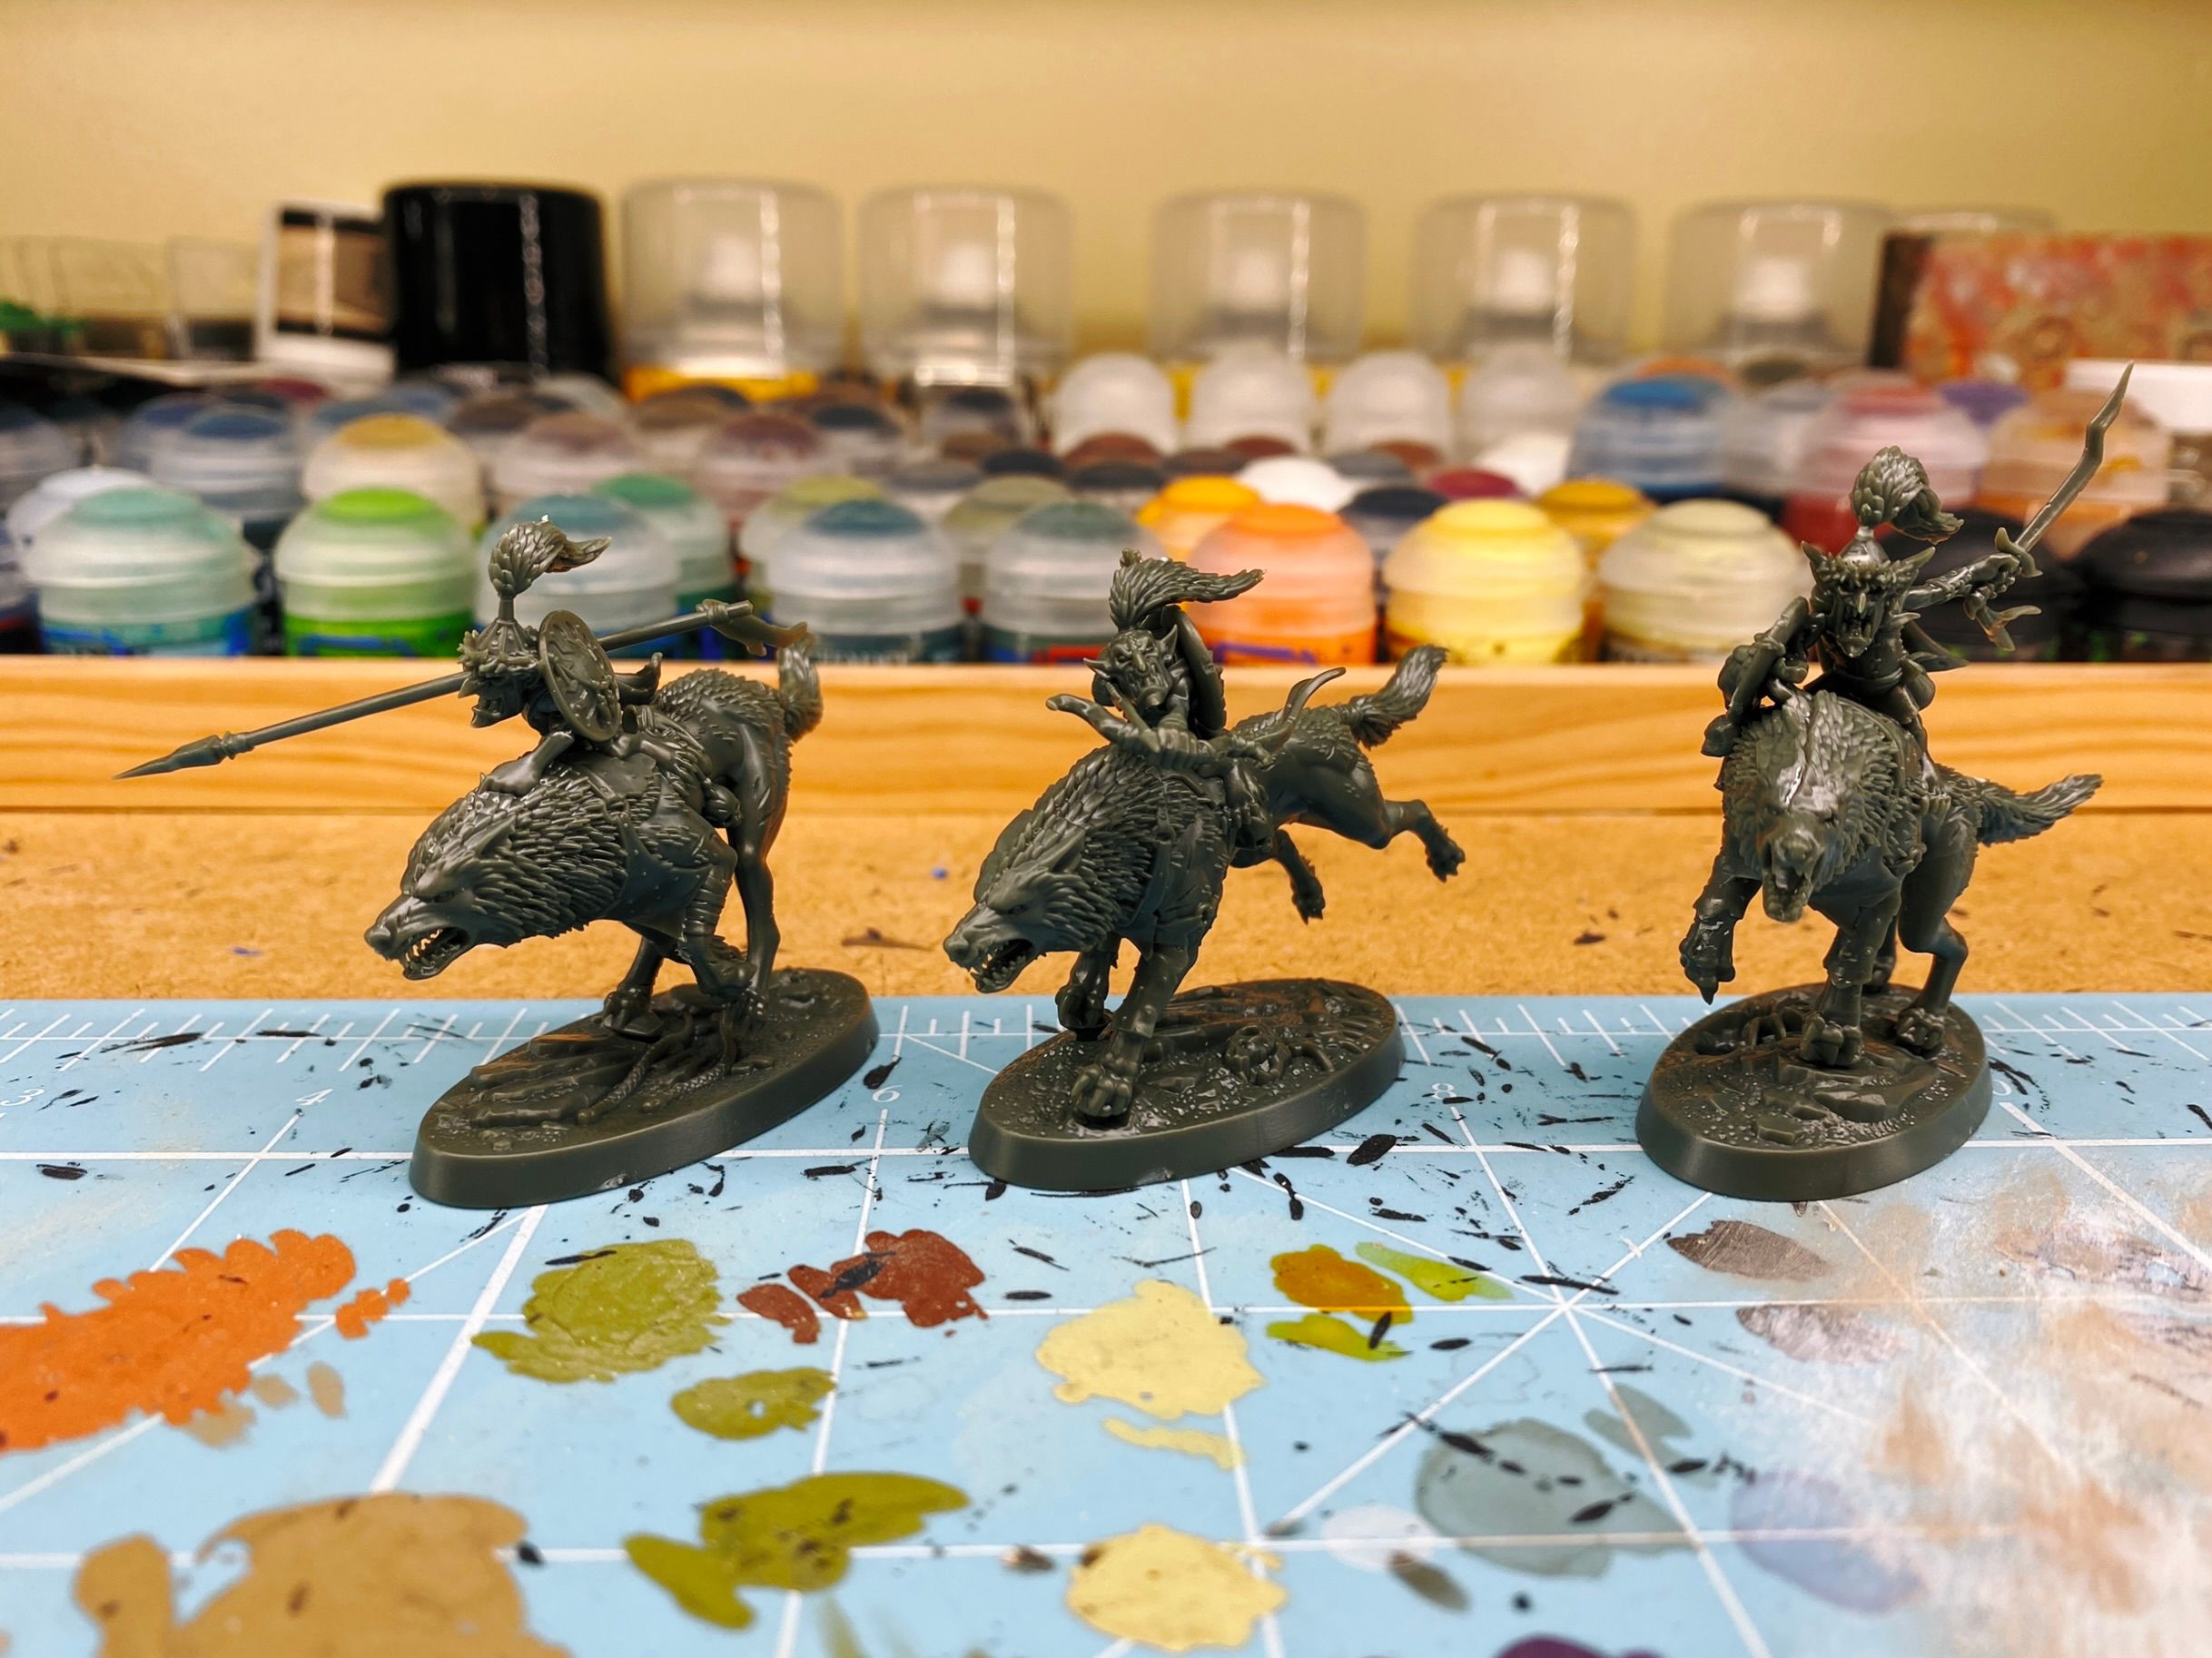 A photo of the Warhammer Underworlds warband "Rippa's Snarlfangs". It consists of three goblins with Mongolian-style hats riding on the back of big wolves. One has a big spear, another is aiming a bow and arrow, and the third is waving a sword around.